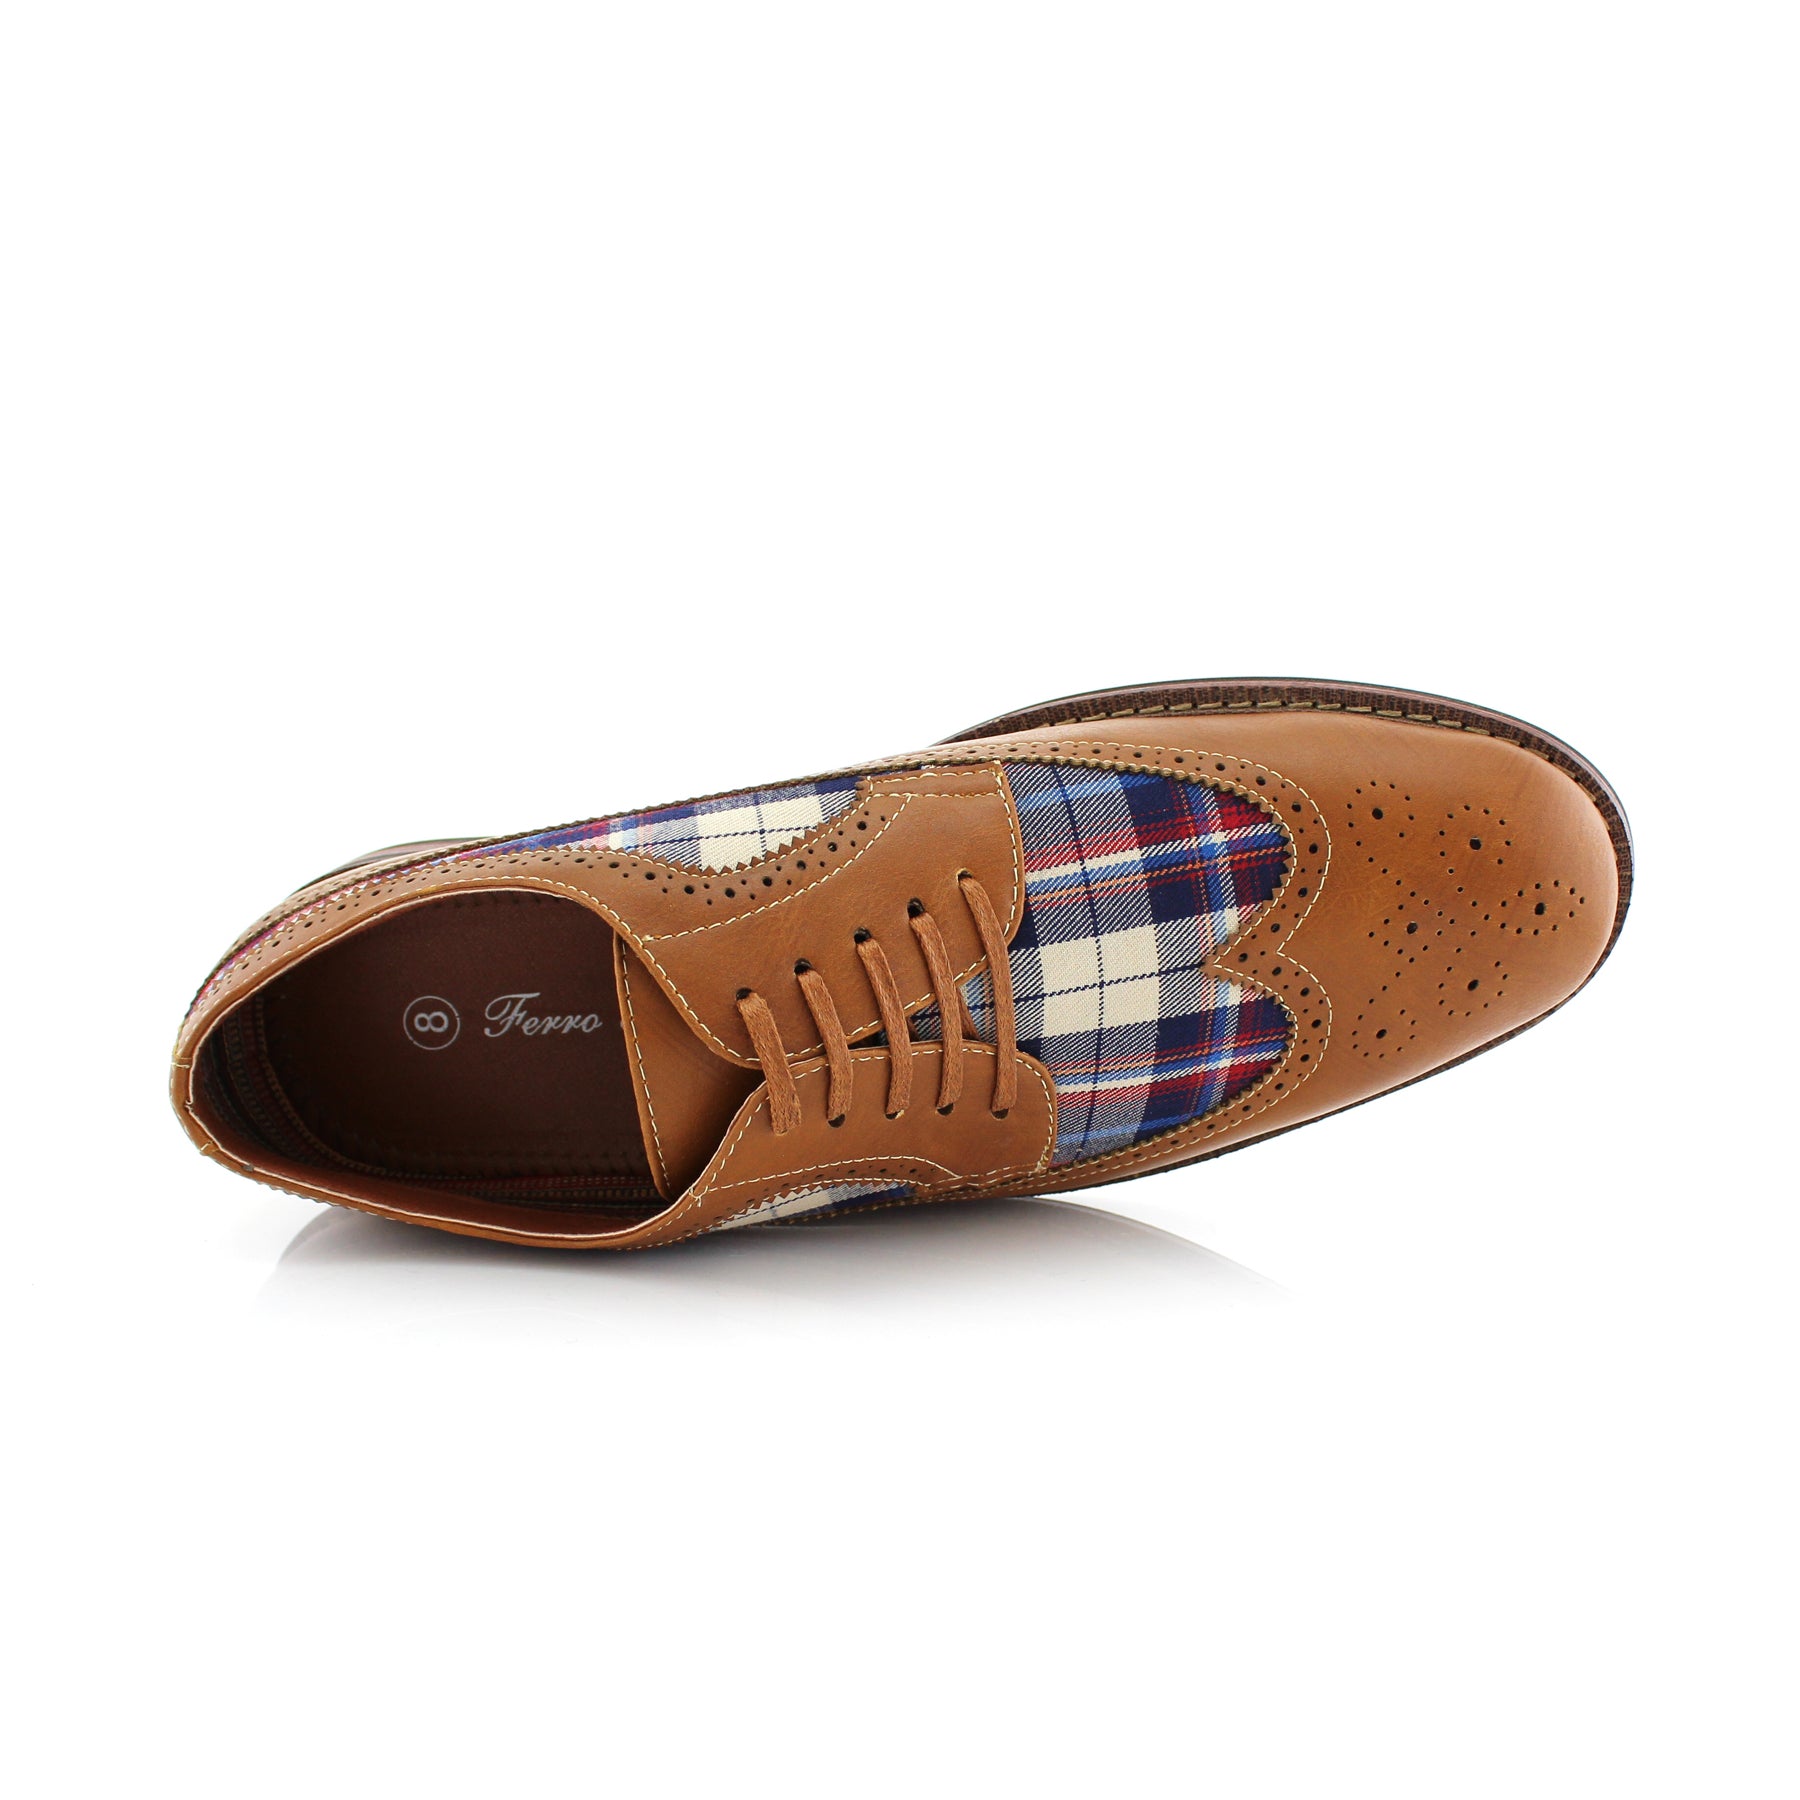 Plaid Long Wingtip Brogue Derby Shoes | Ron by Ferro Aldo | Conal Footwear | Top-Down Angle View